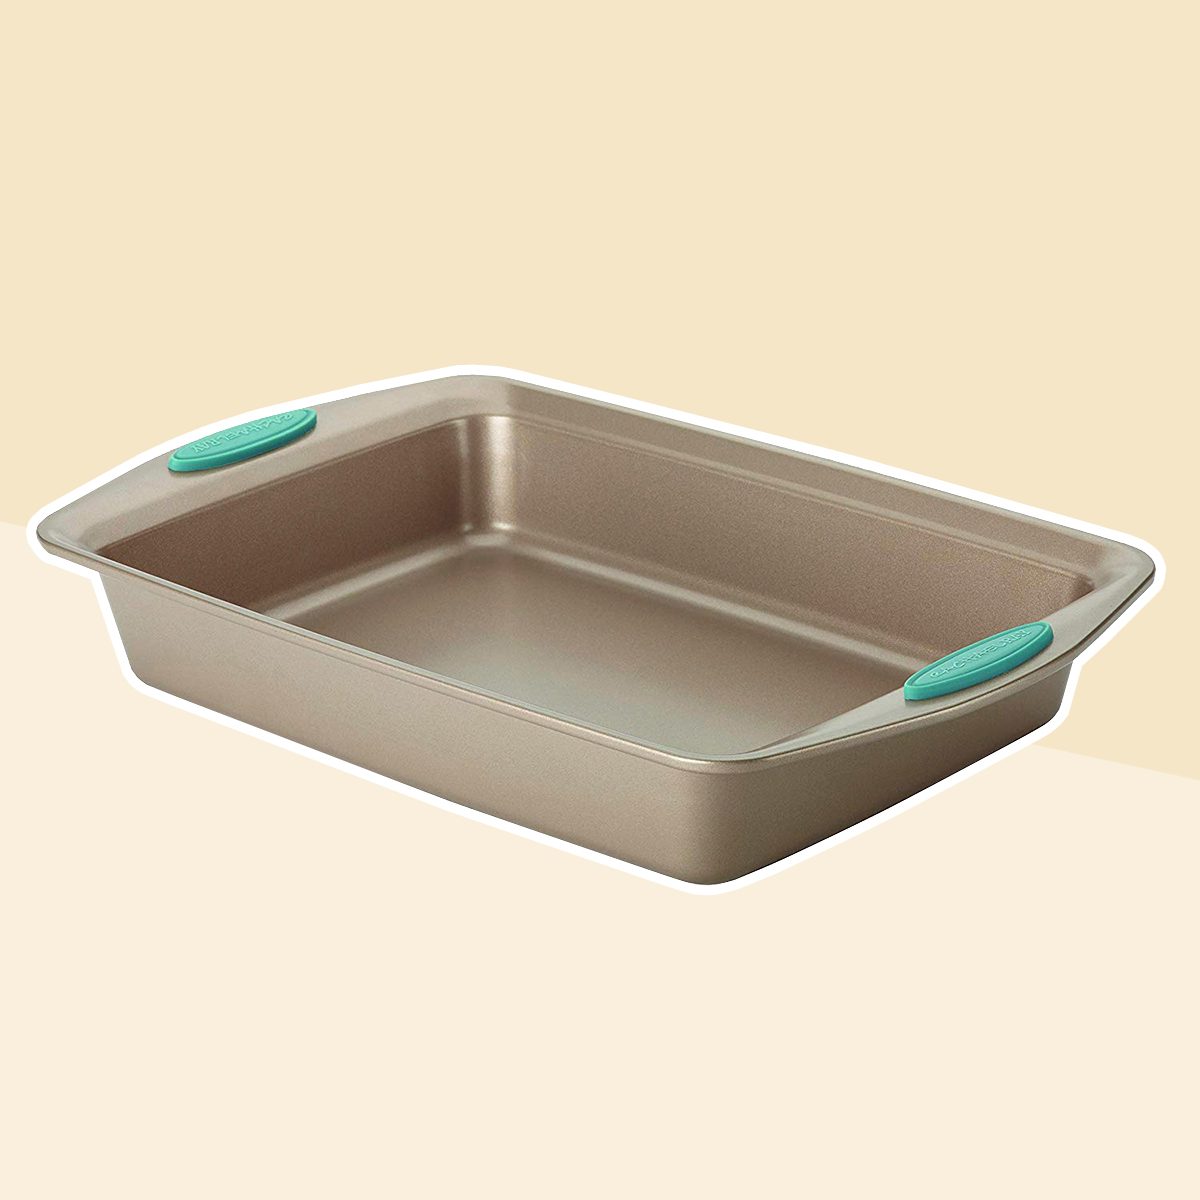 https://www.tasteofhome.com/wp-content/uploads/2019/03/Rachael-Ray-Cucina-Nonstick-Bakeware-9-Inch-by-13-Inch-Rectangle-Cake-Pan-Latte-Brown-with-Agave-Blue-Handles-.jpg?fit=700%2C700